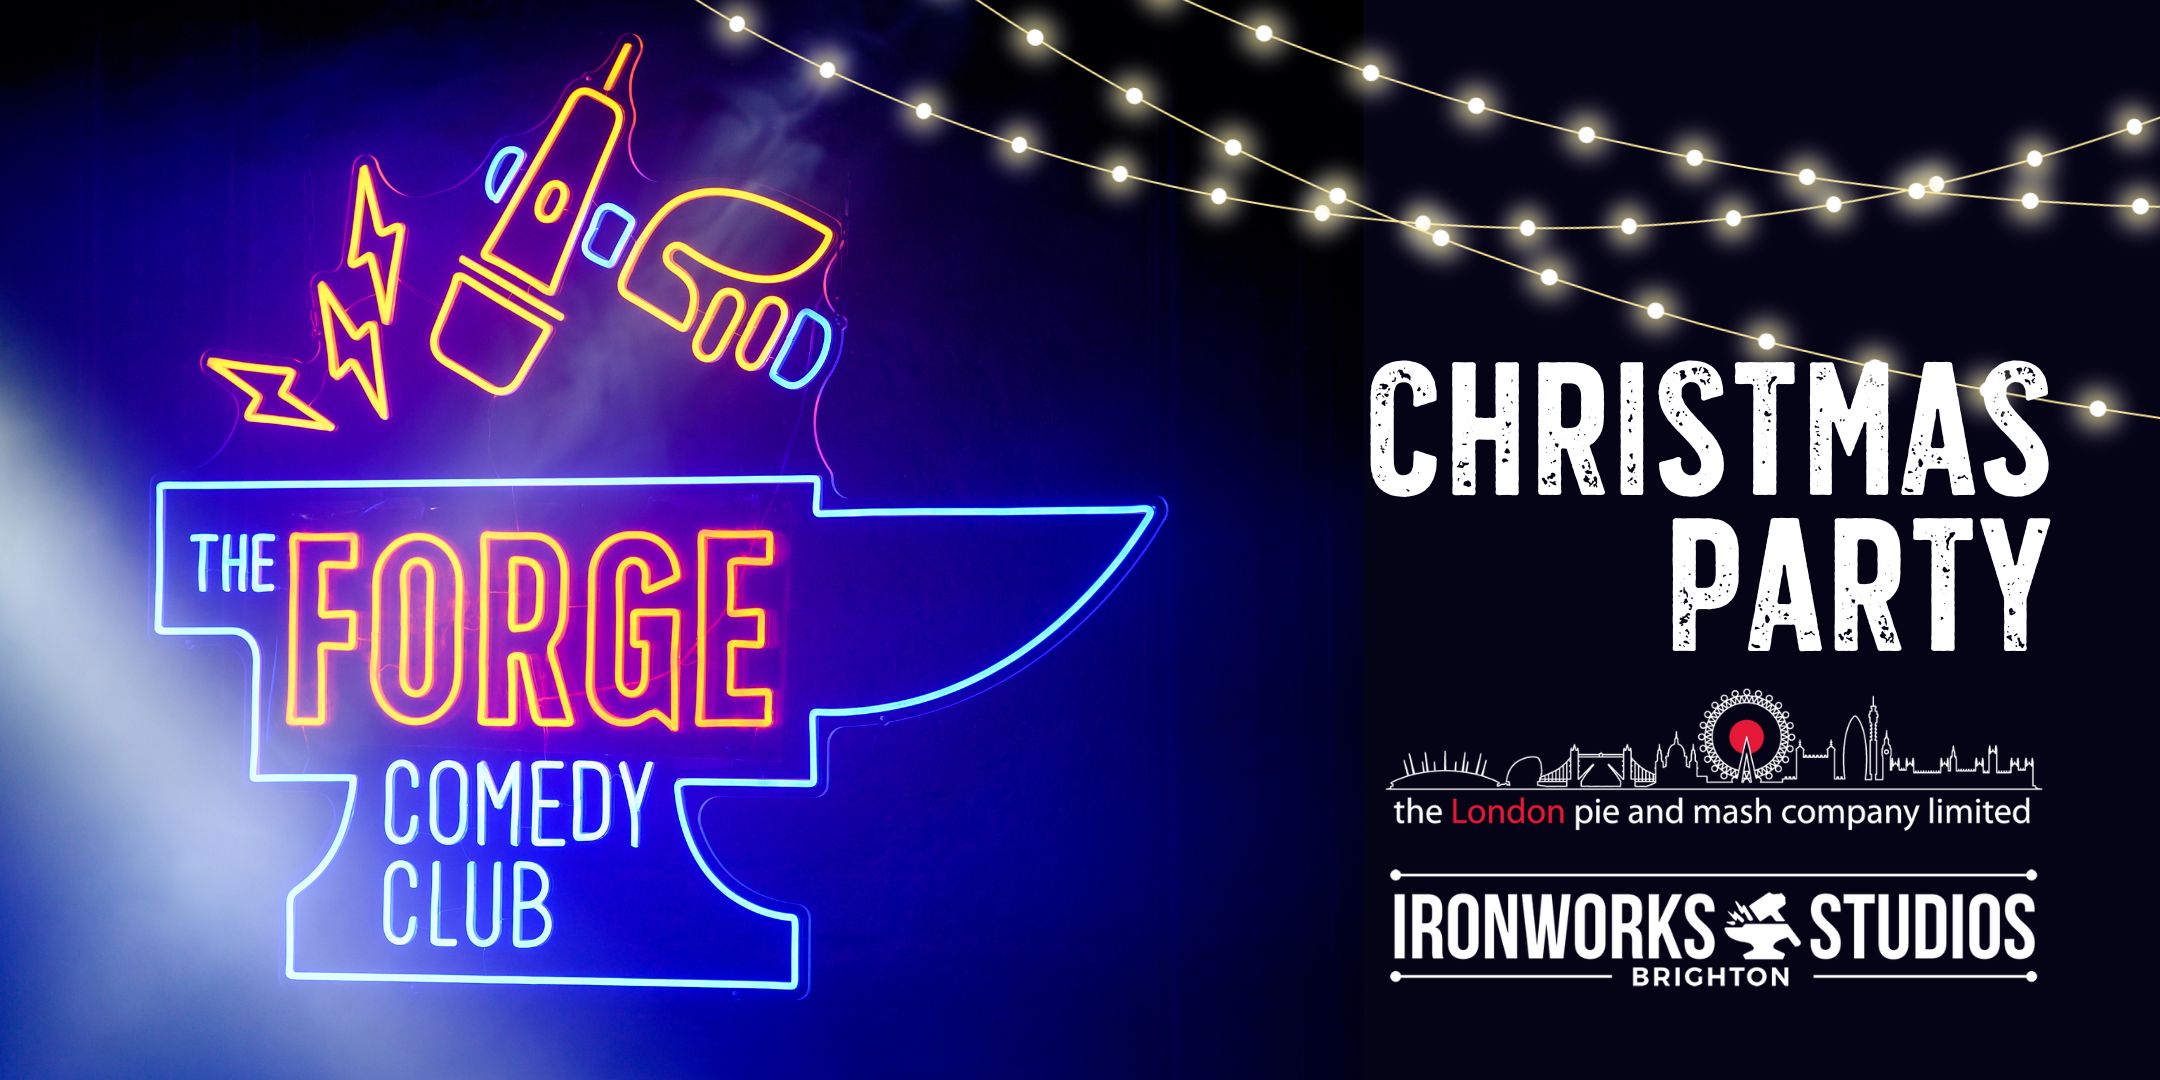 14th December: The Forge Comedy Club Christmas Party